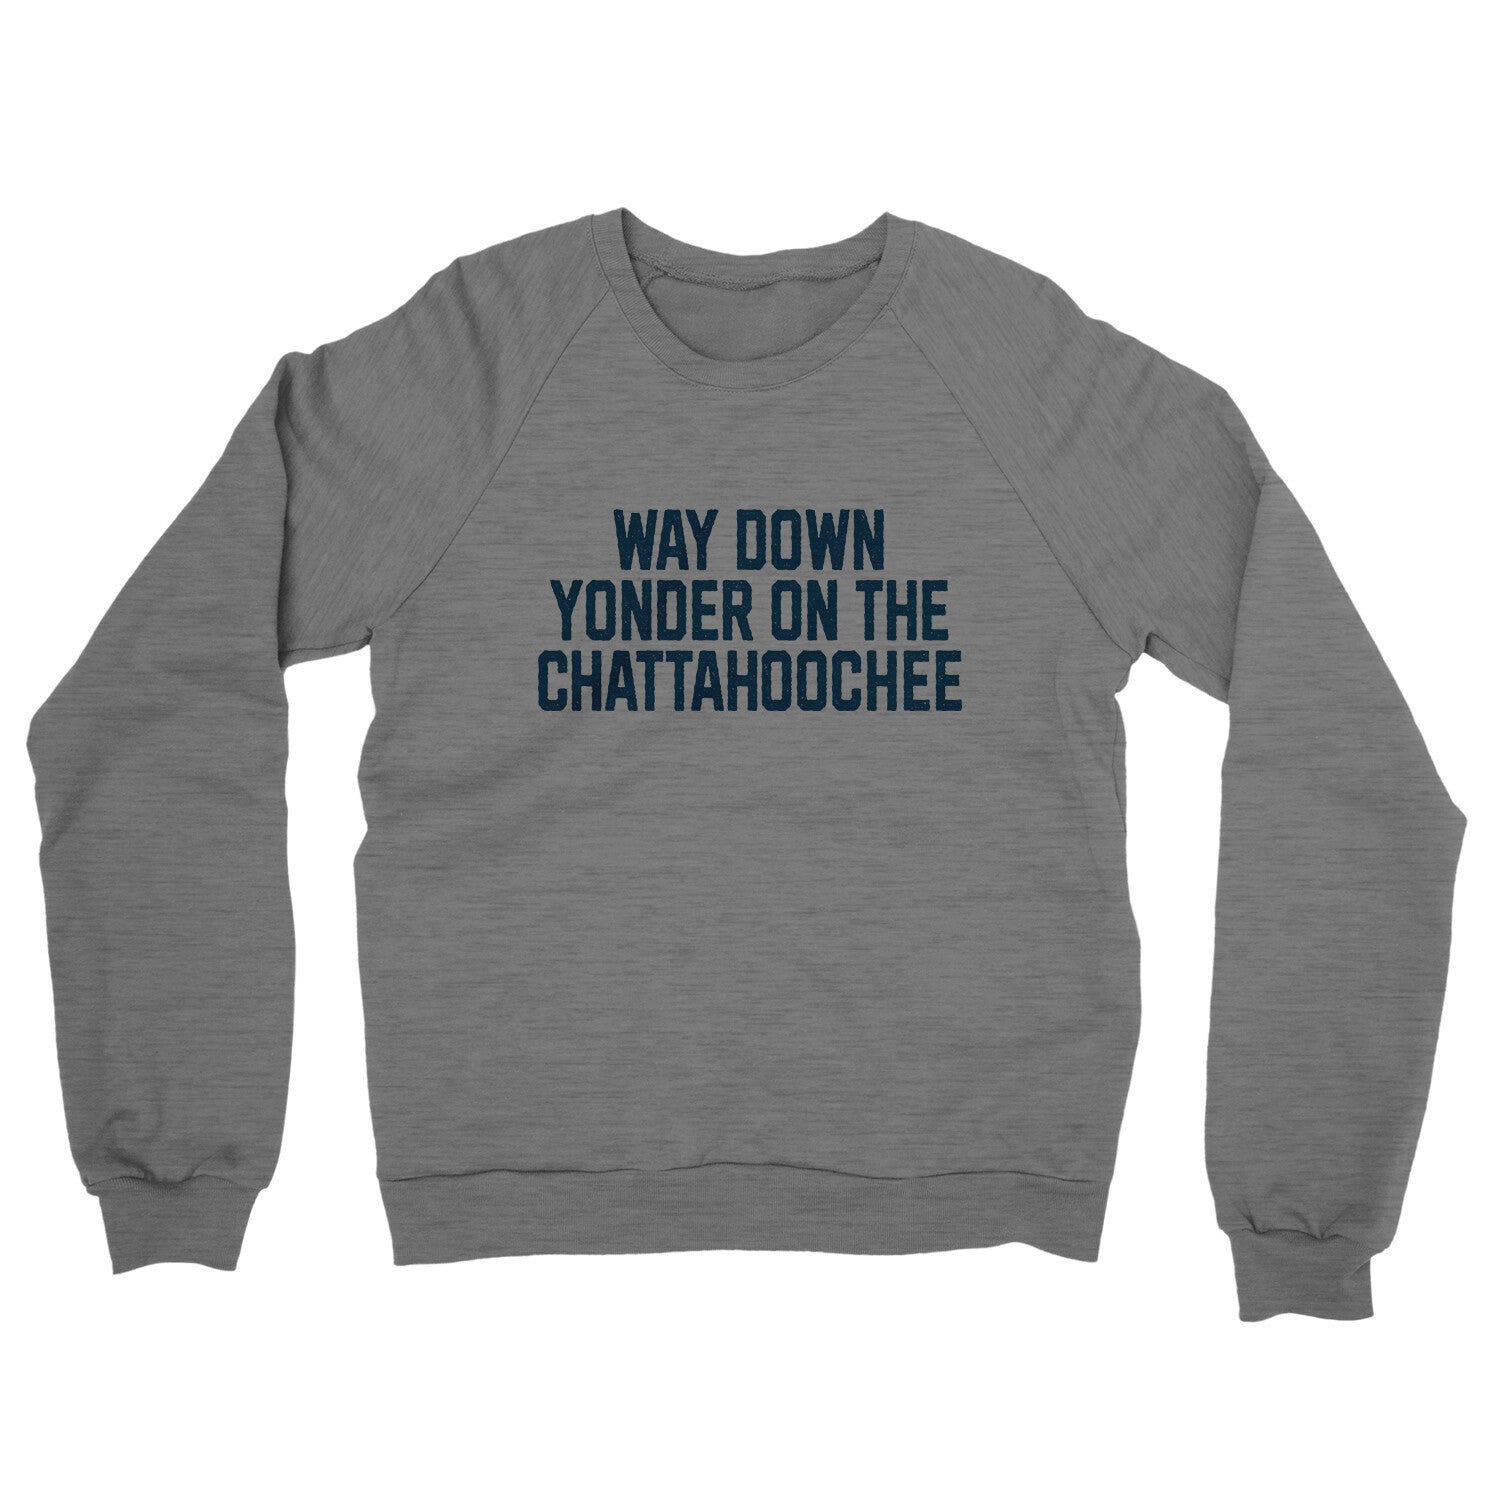 Way Down Yonder on the Chattahoochee in Graphite Heather Color